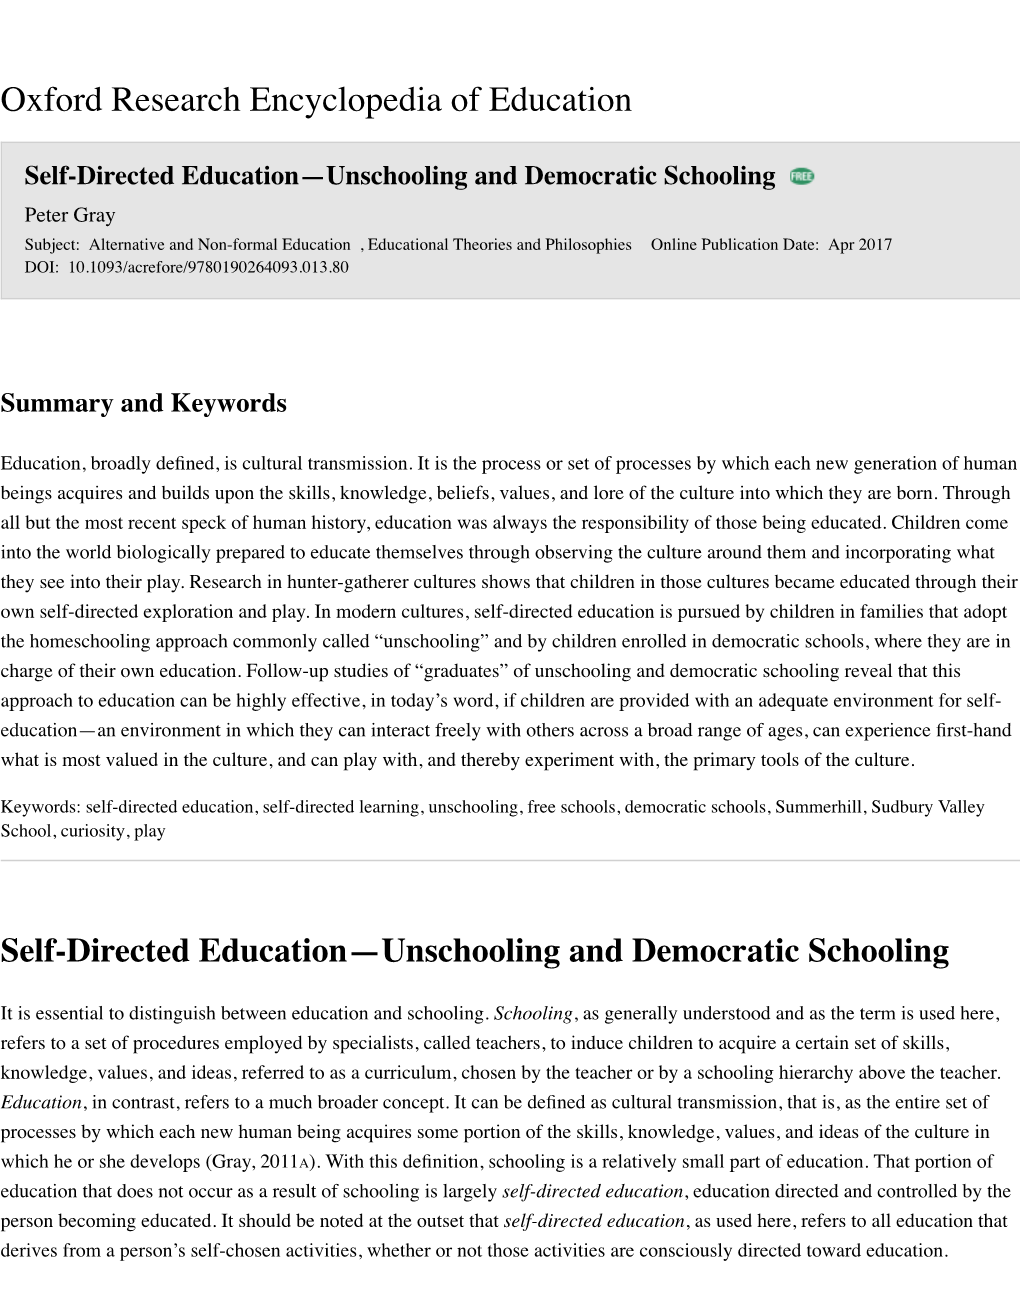 Self-Directed Education—Unschooling and Democratic